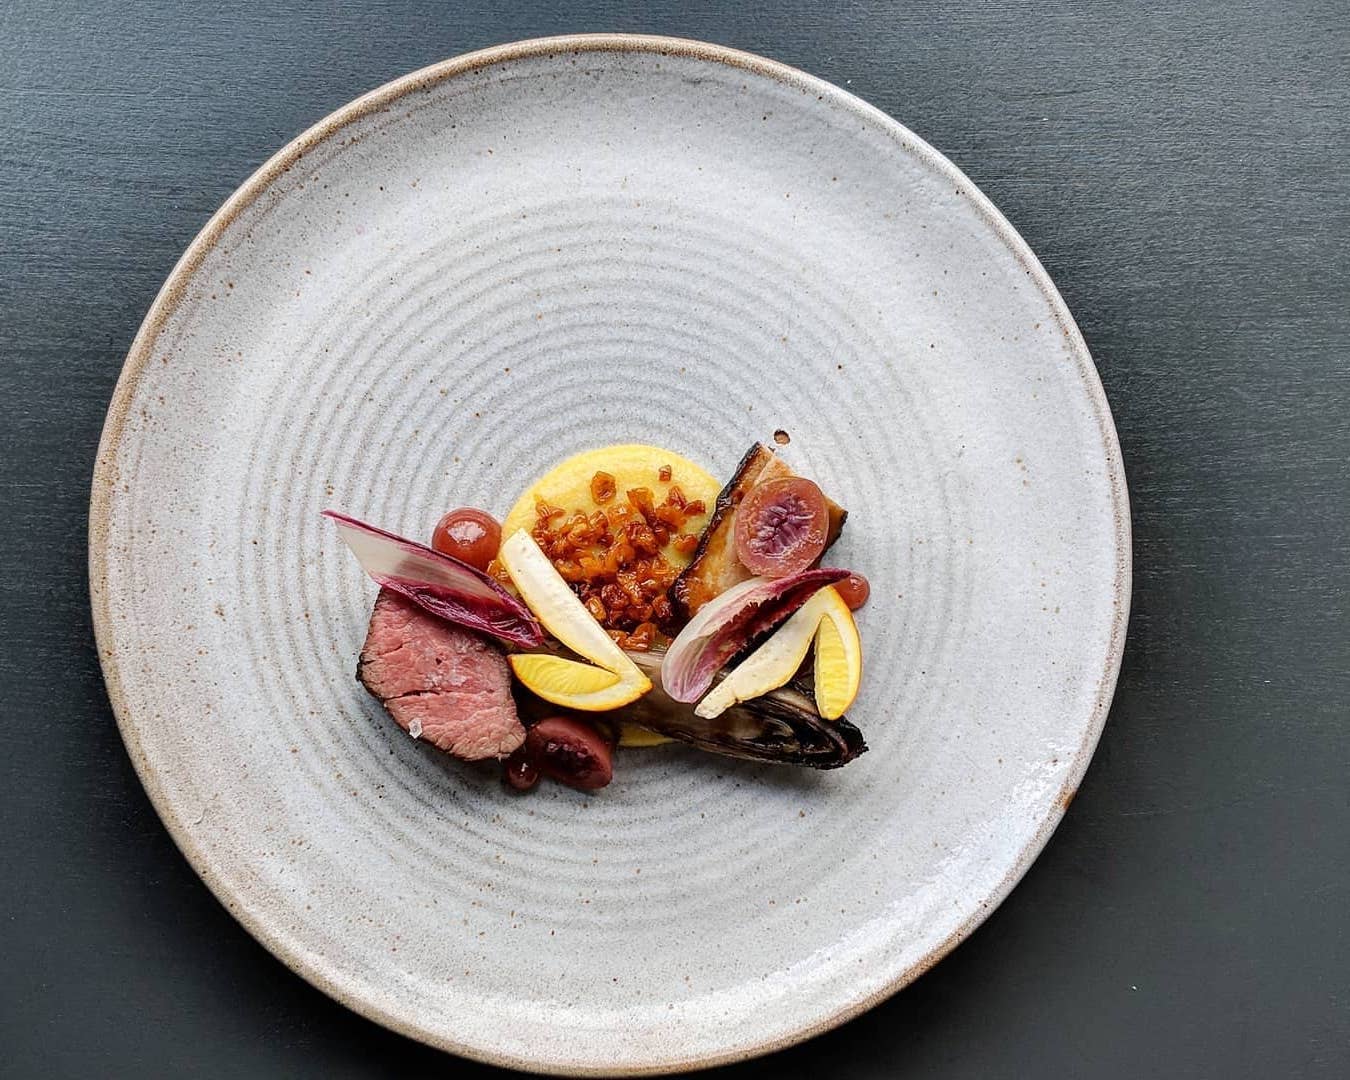 Iberico pork, chicories, gooseberry, ovuli mushroom at Pidgin restaurant in Hackney, which will make its weekly menu a mystery — it won Best Restaurant at the Observer Food Monthly Awards in 2017